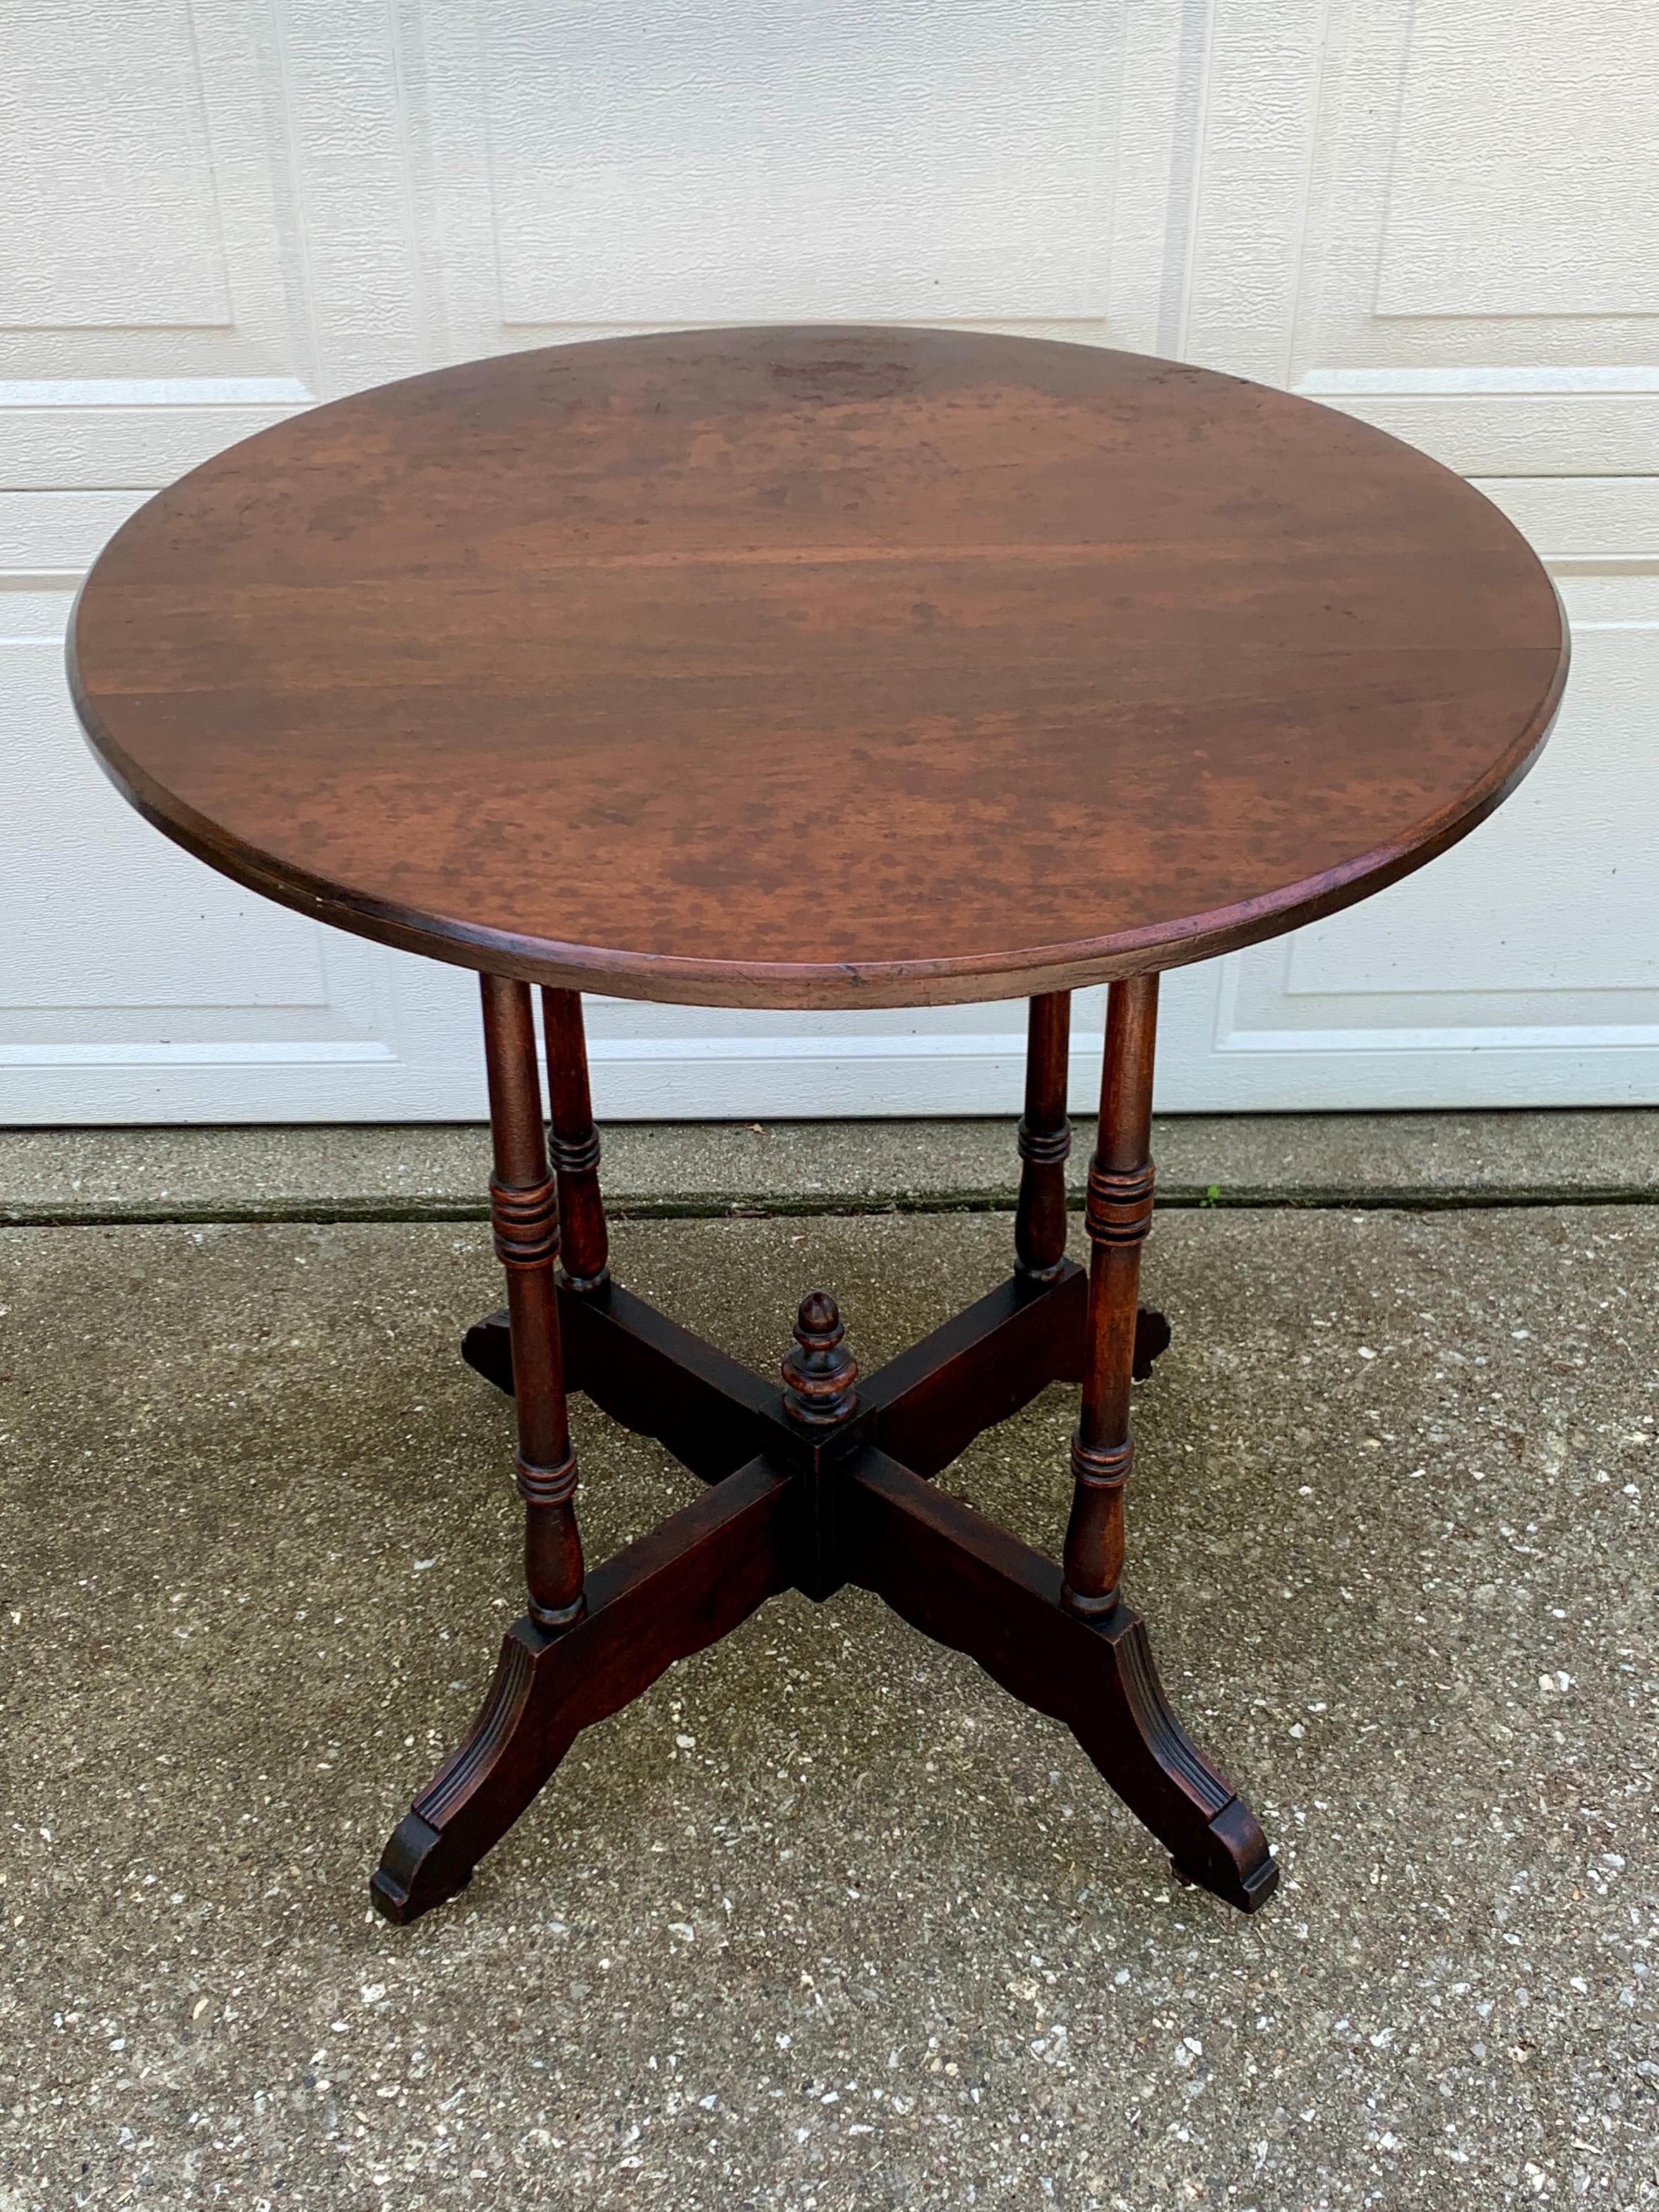 A gorgeous Victorian round side or center table

USA, circa late 19th century

Walnut, with porcelain castors

Measures: 27.75